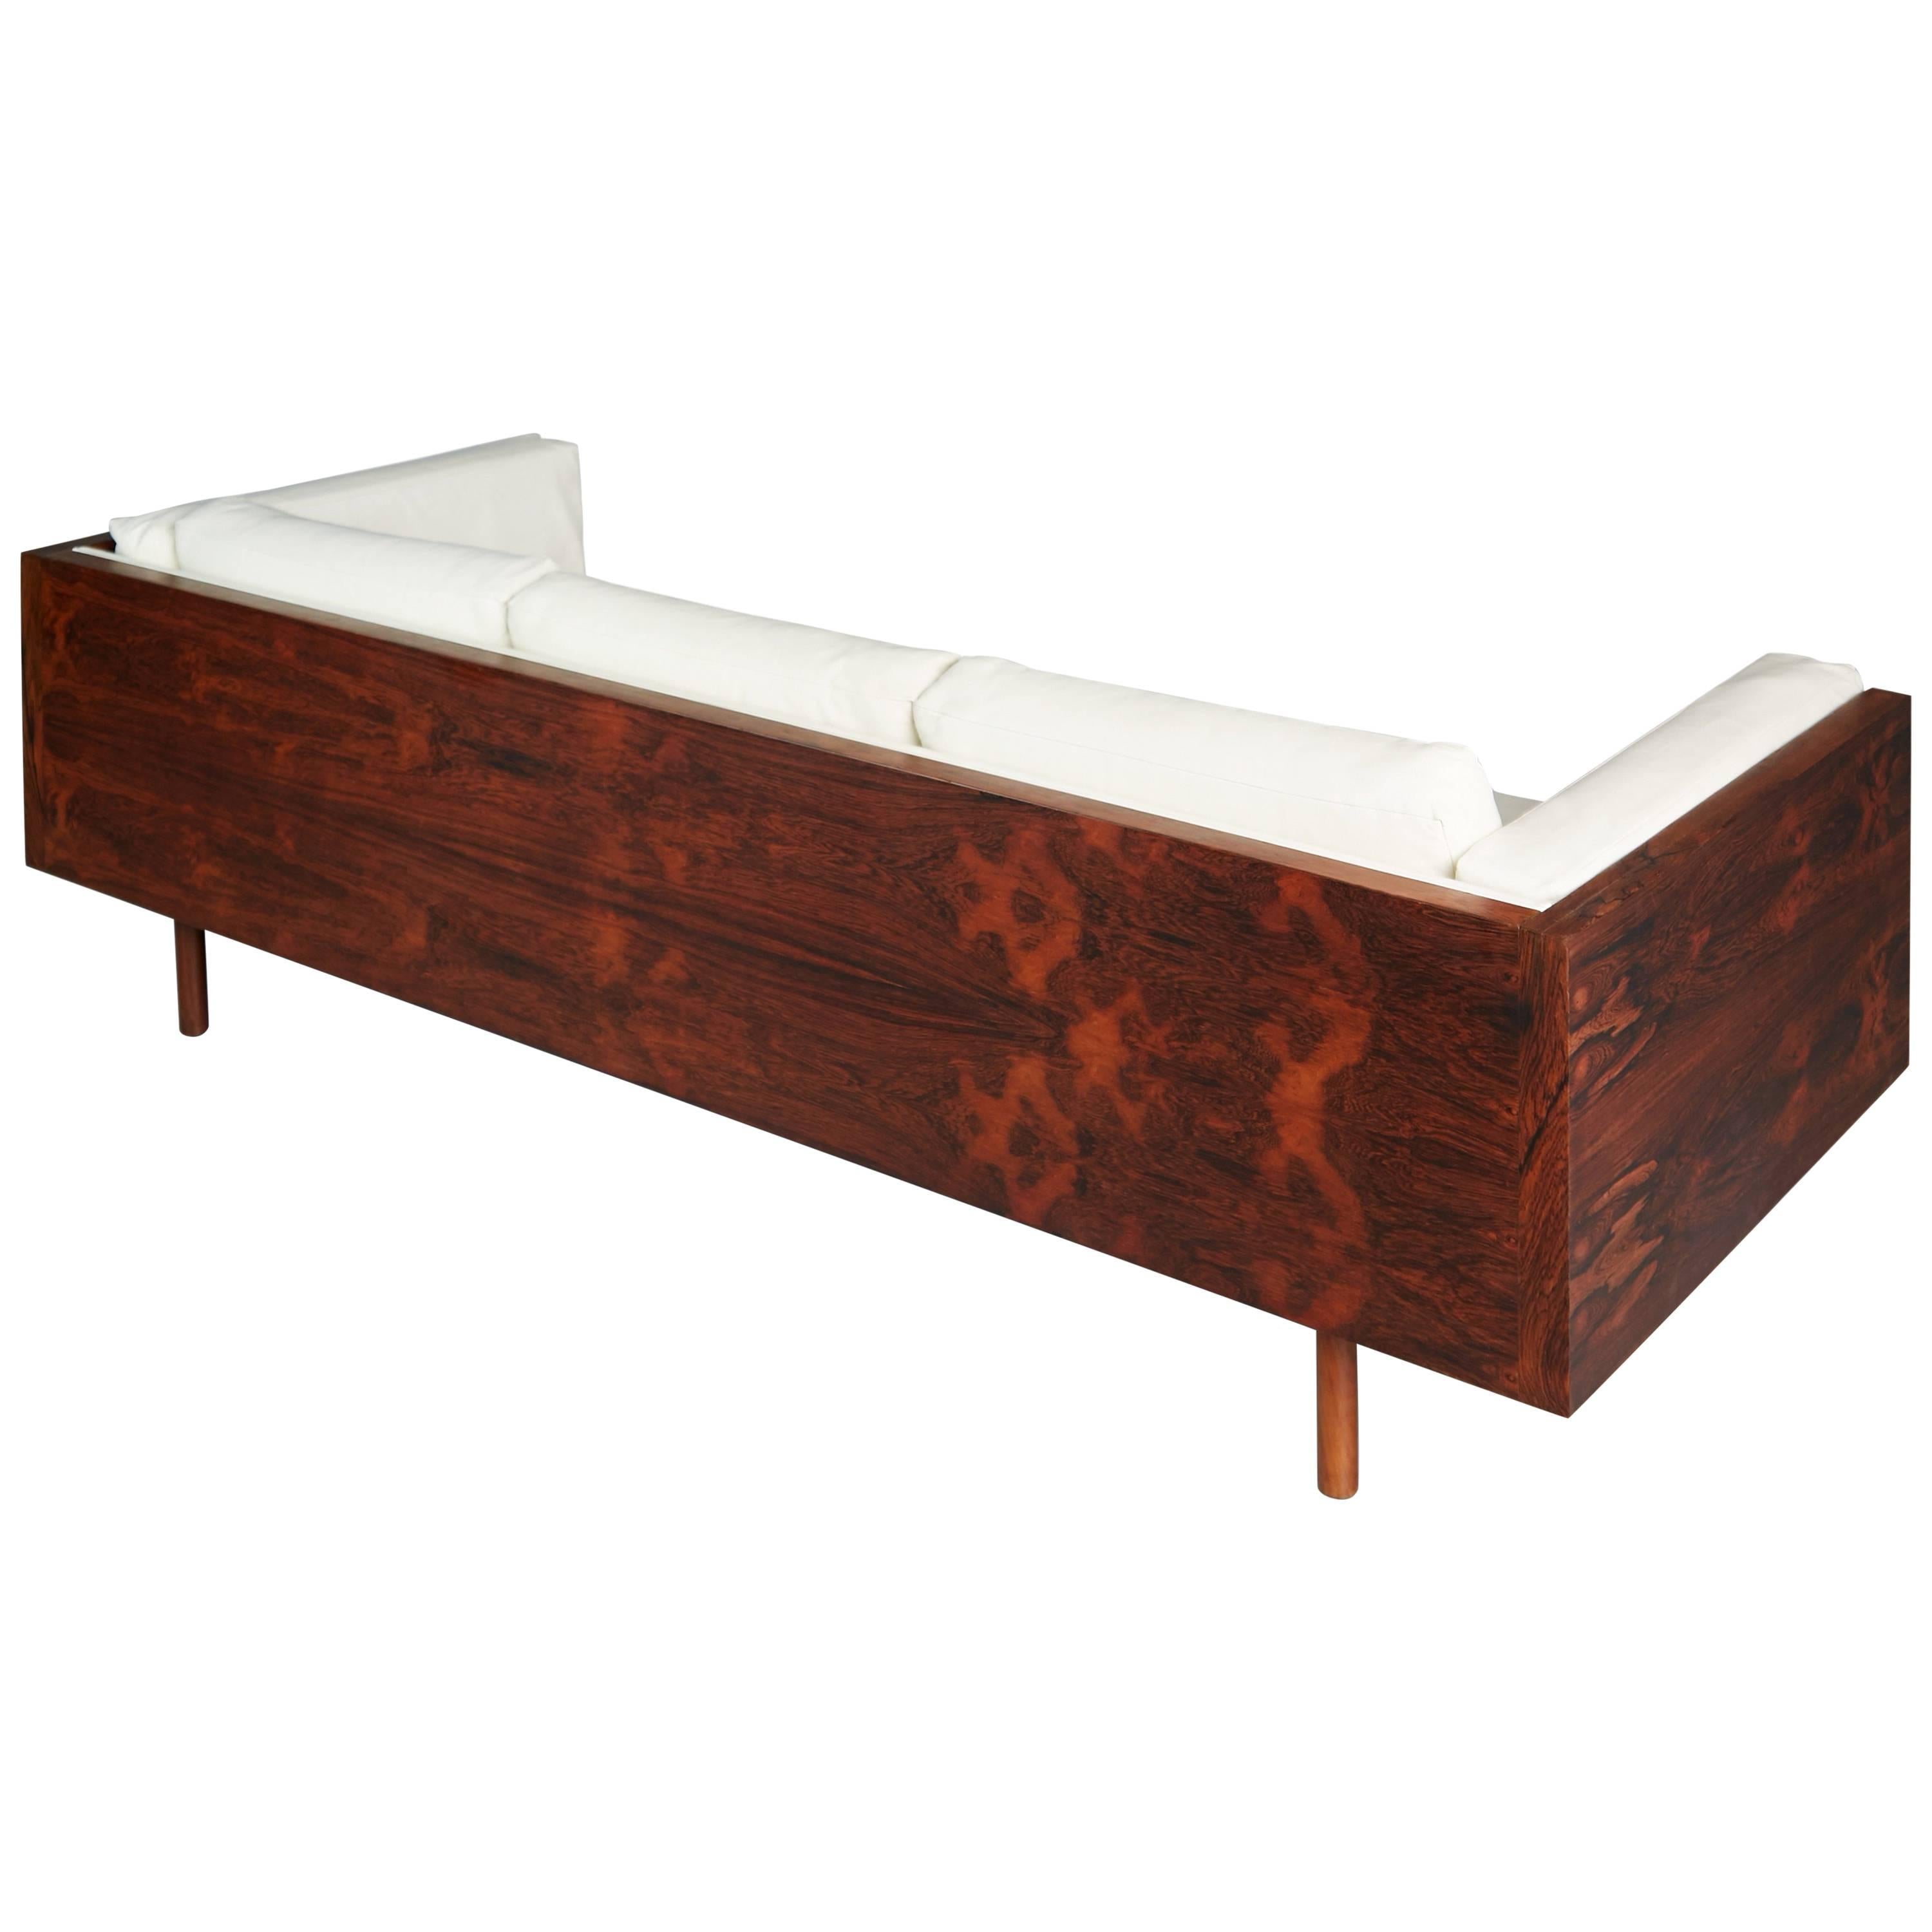 Rosewood and Leather Case Sofa by Milo Baughman for Thayer Coggin, circa 1960